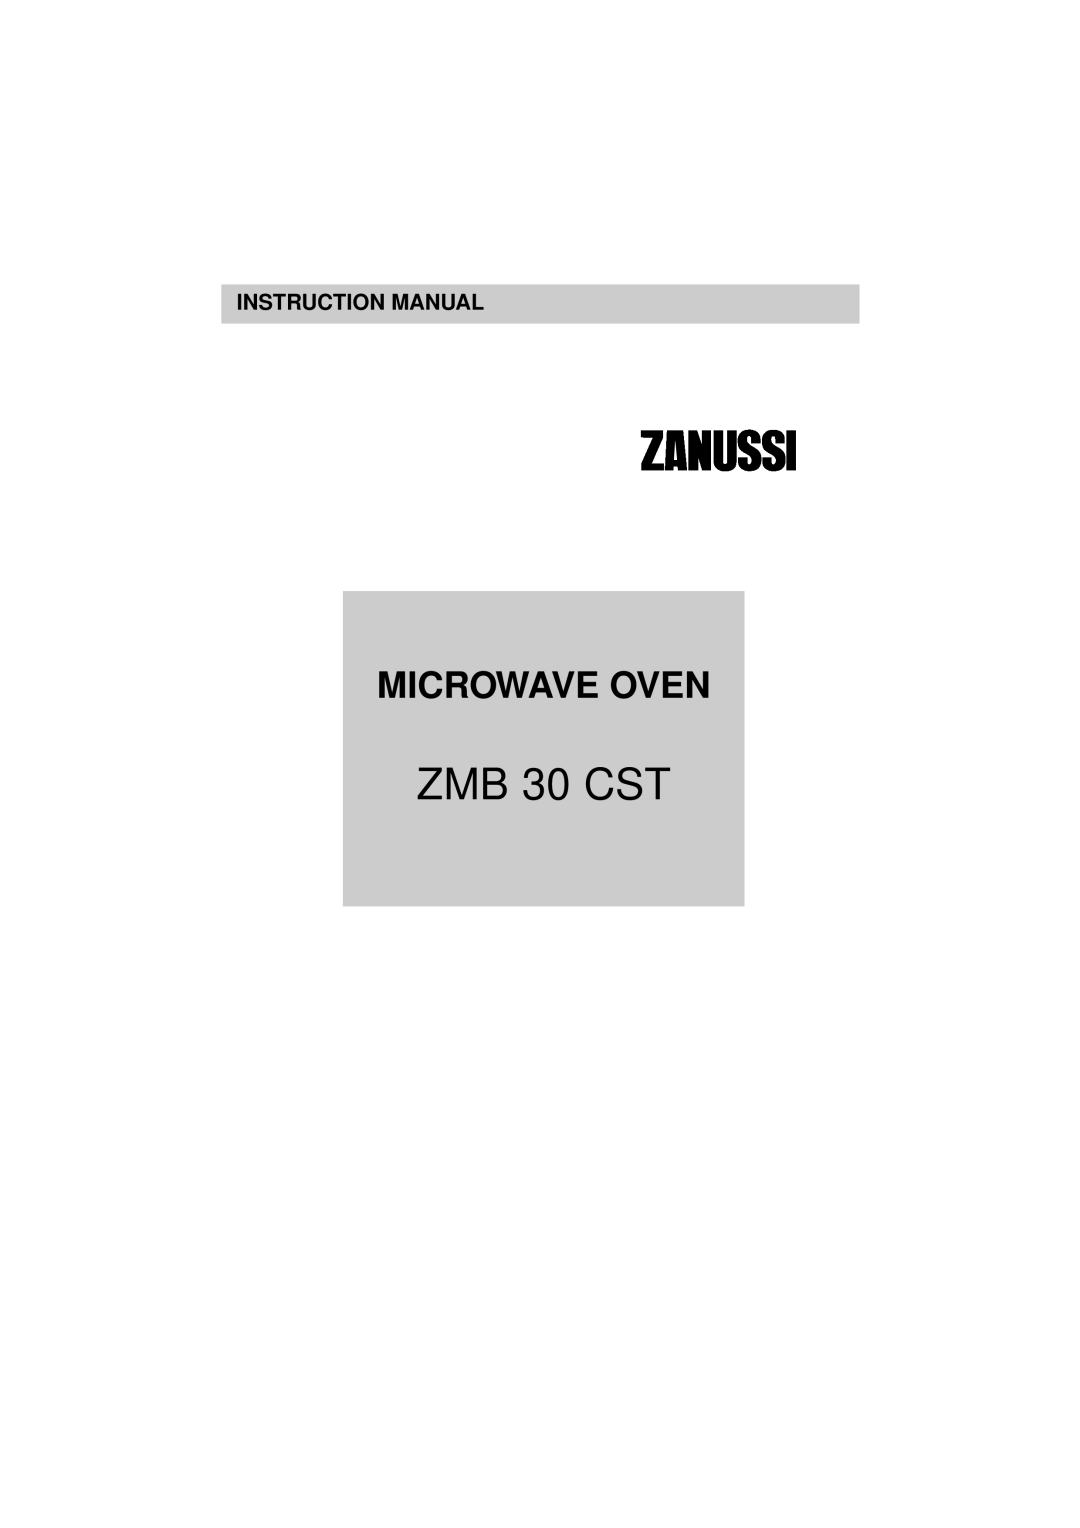 Zanussi ZMB 30 CST instruction manual Microwave Oven 